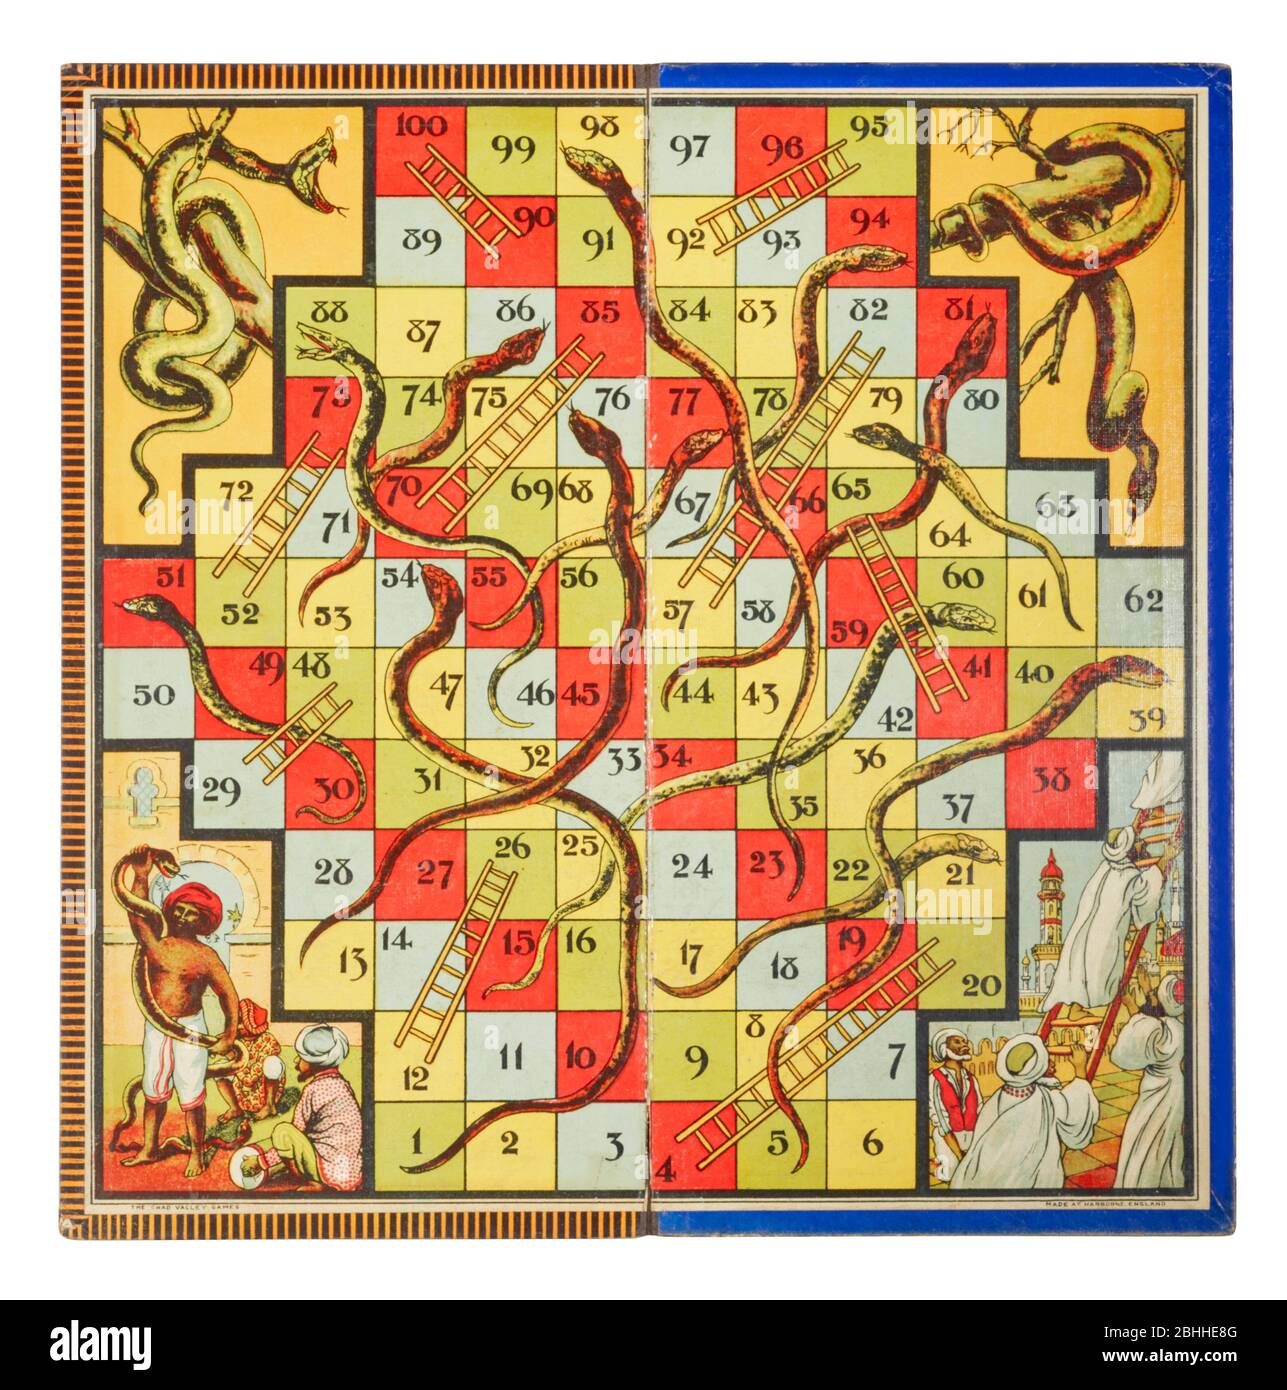 Inside of snakes and ladders board game with eastern themed illustrations Stock Photo